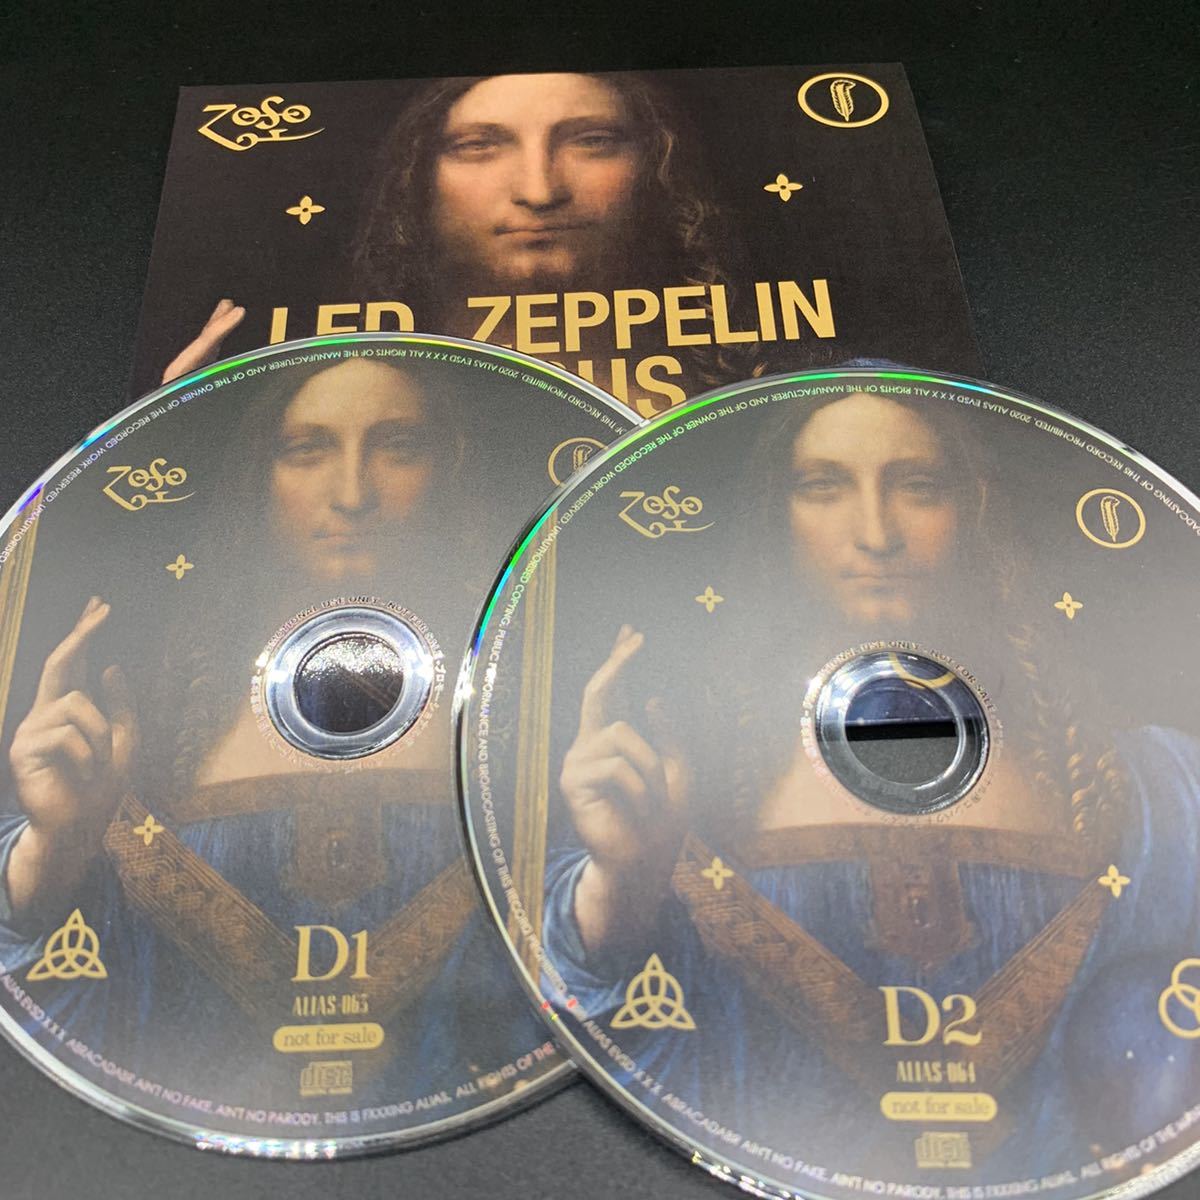 LED ZEPPELIN : JESUS 「ジュデアのジェズス」 2CD 工場プレス銀盤CD 1970 MONTREUX 限定盤！